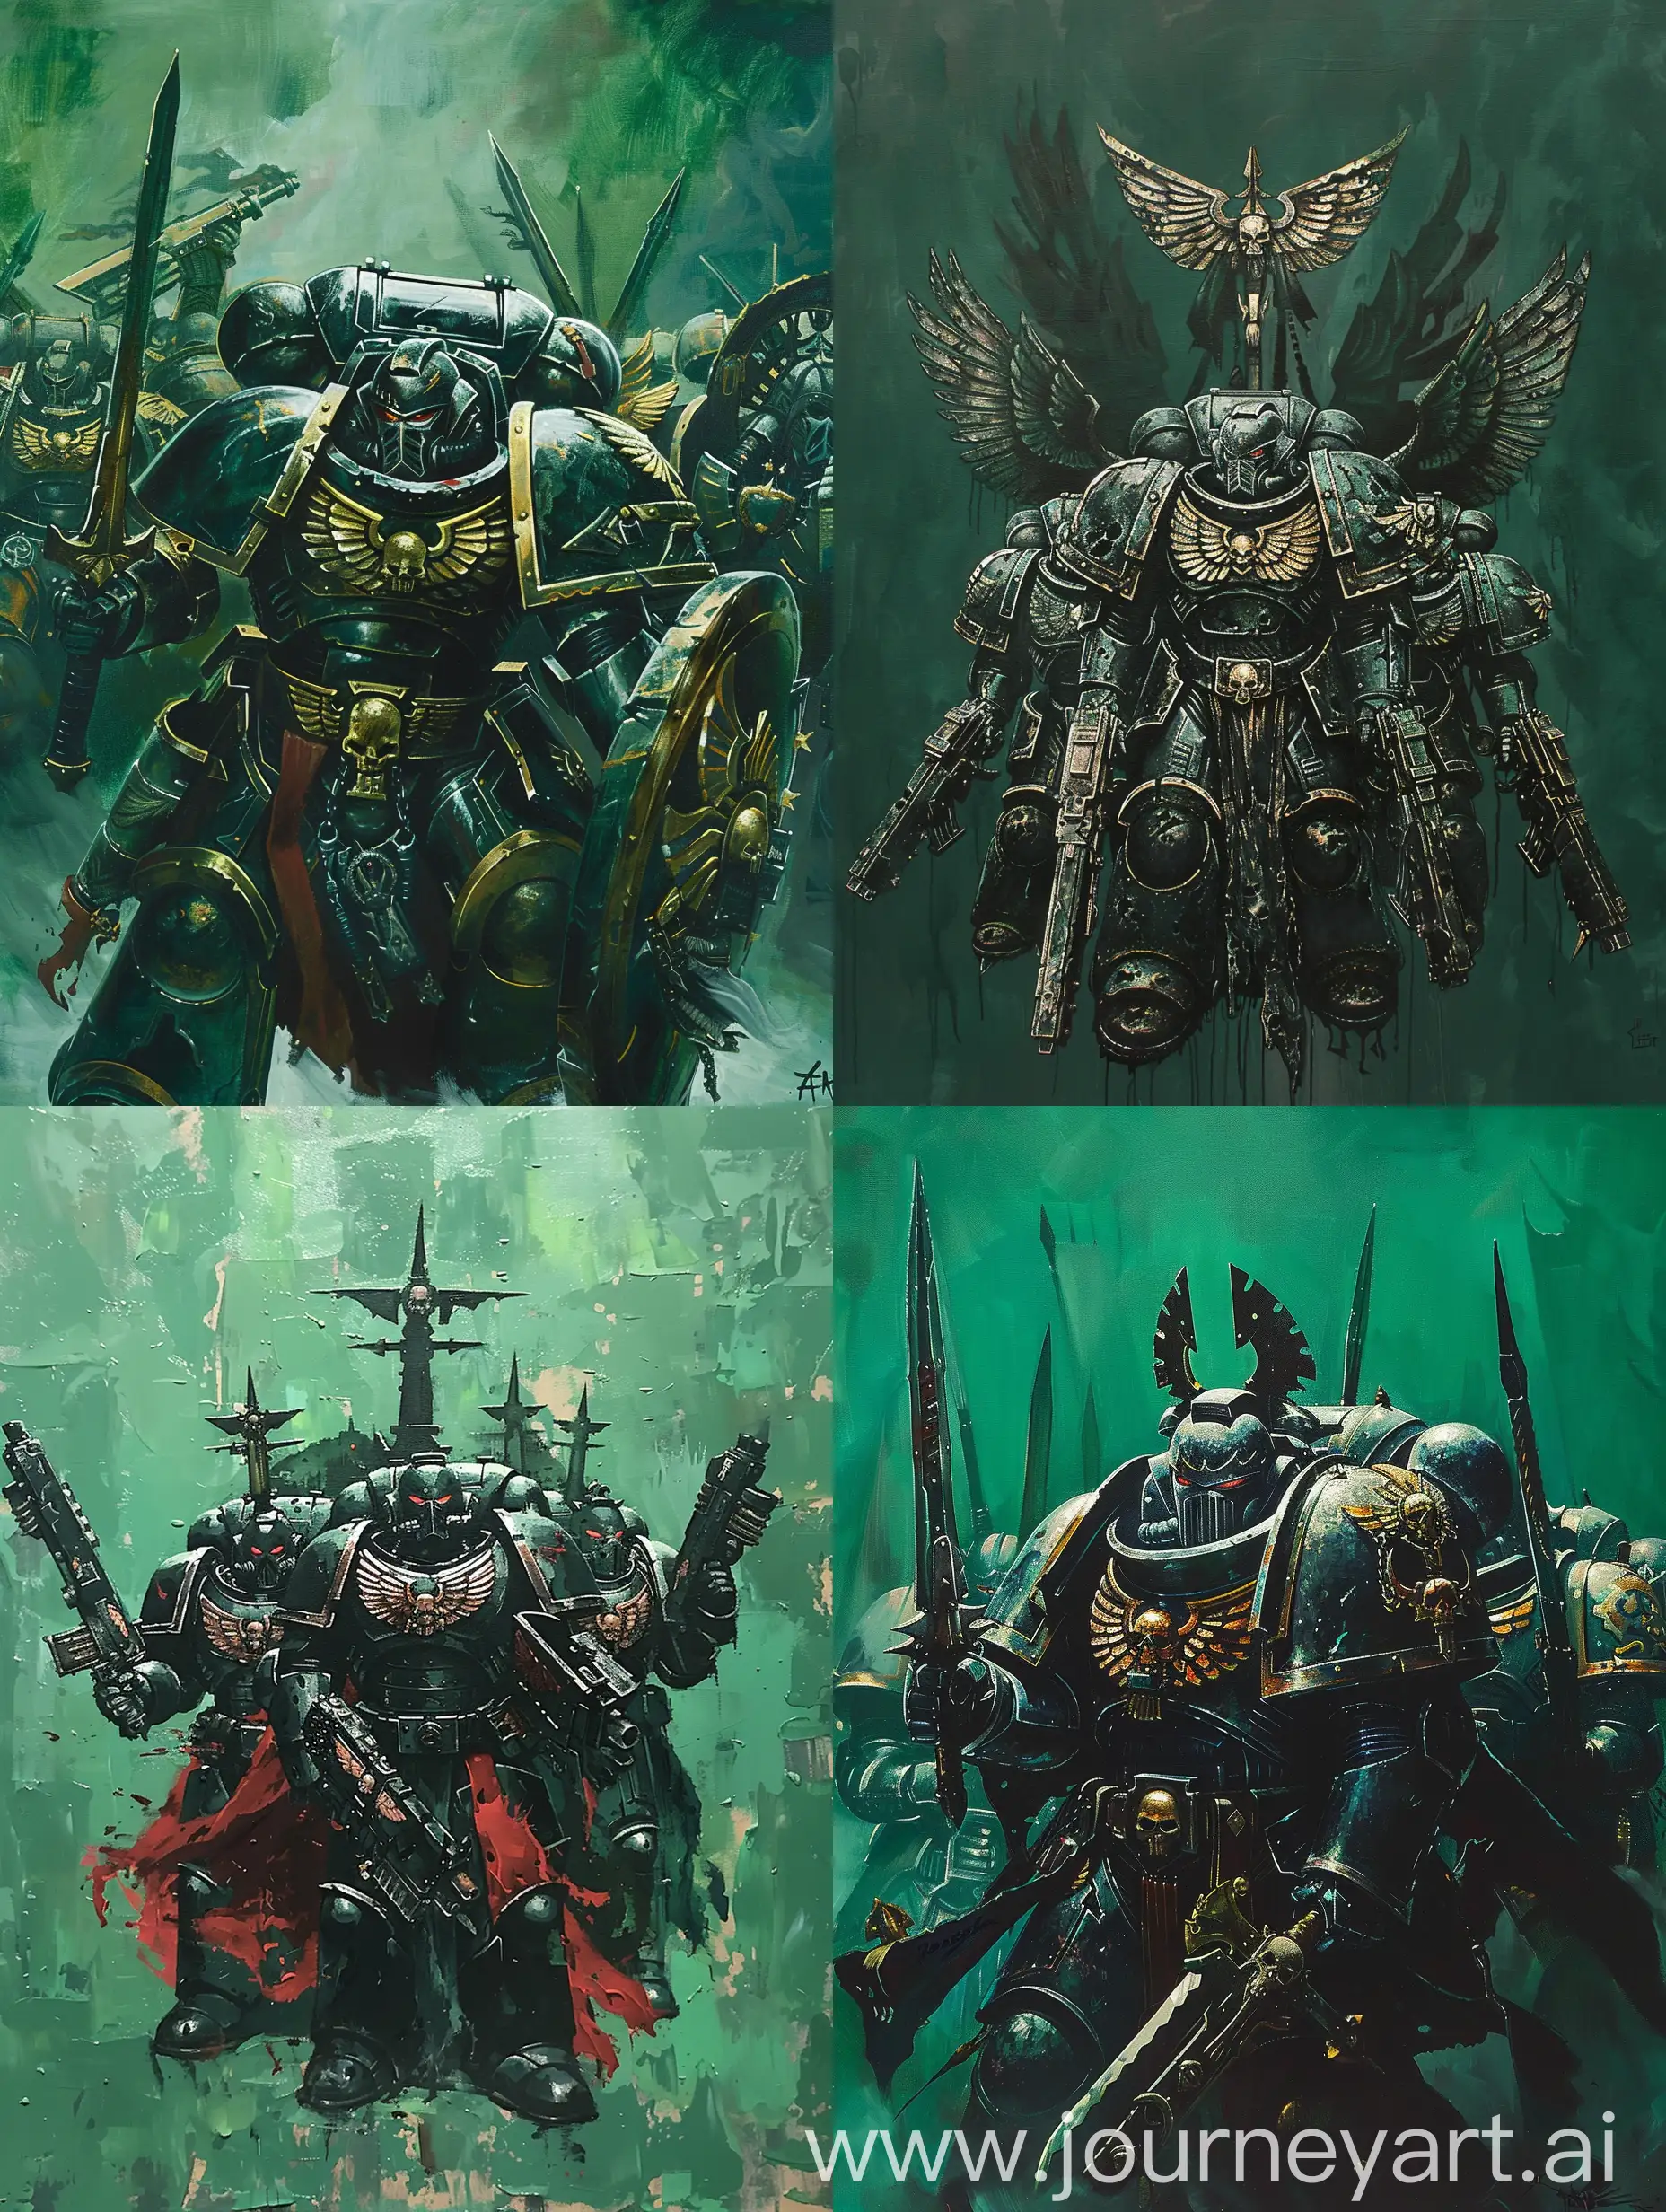 A painting of the Dark Angels from the Warhammer 40k universe. The background is Russian green.